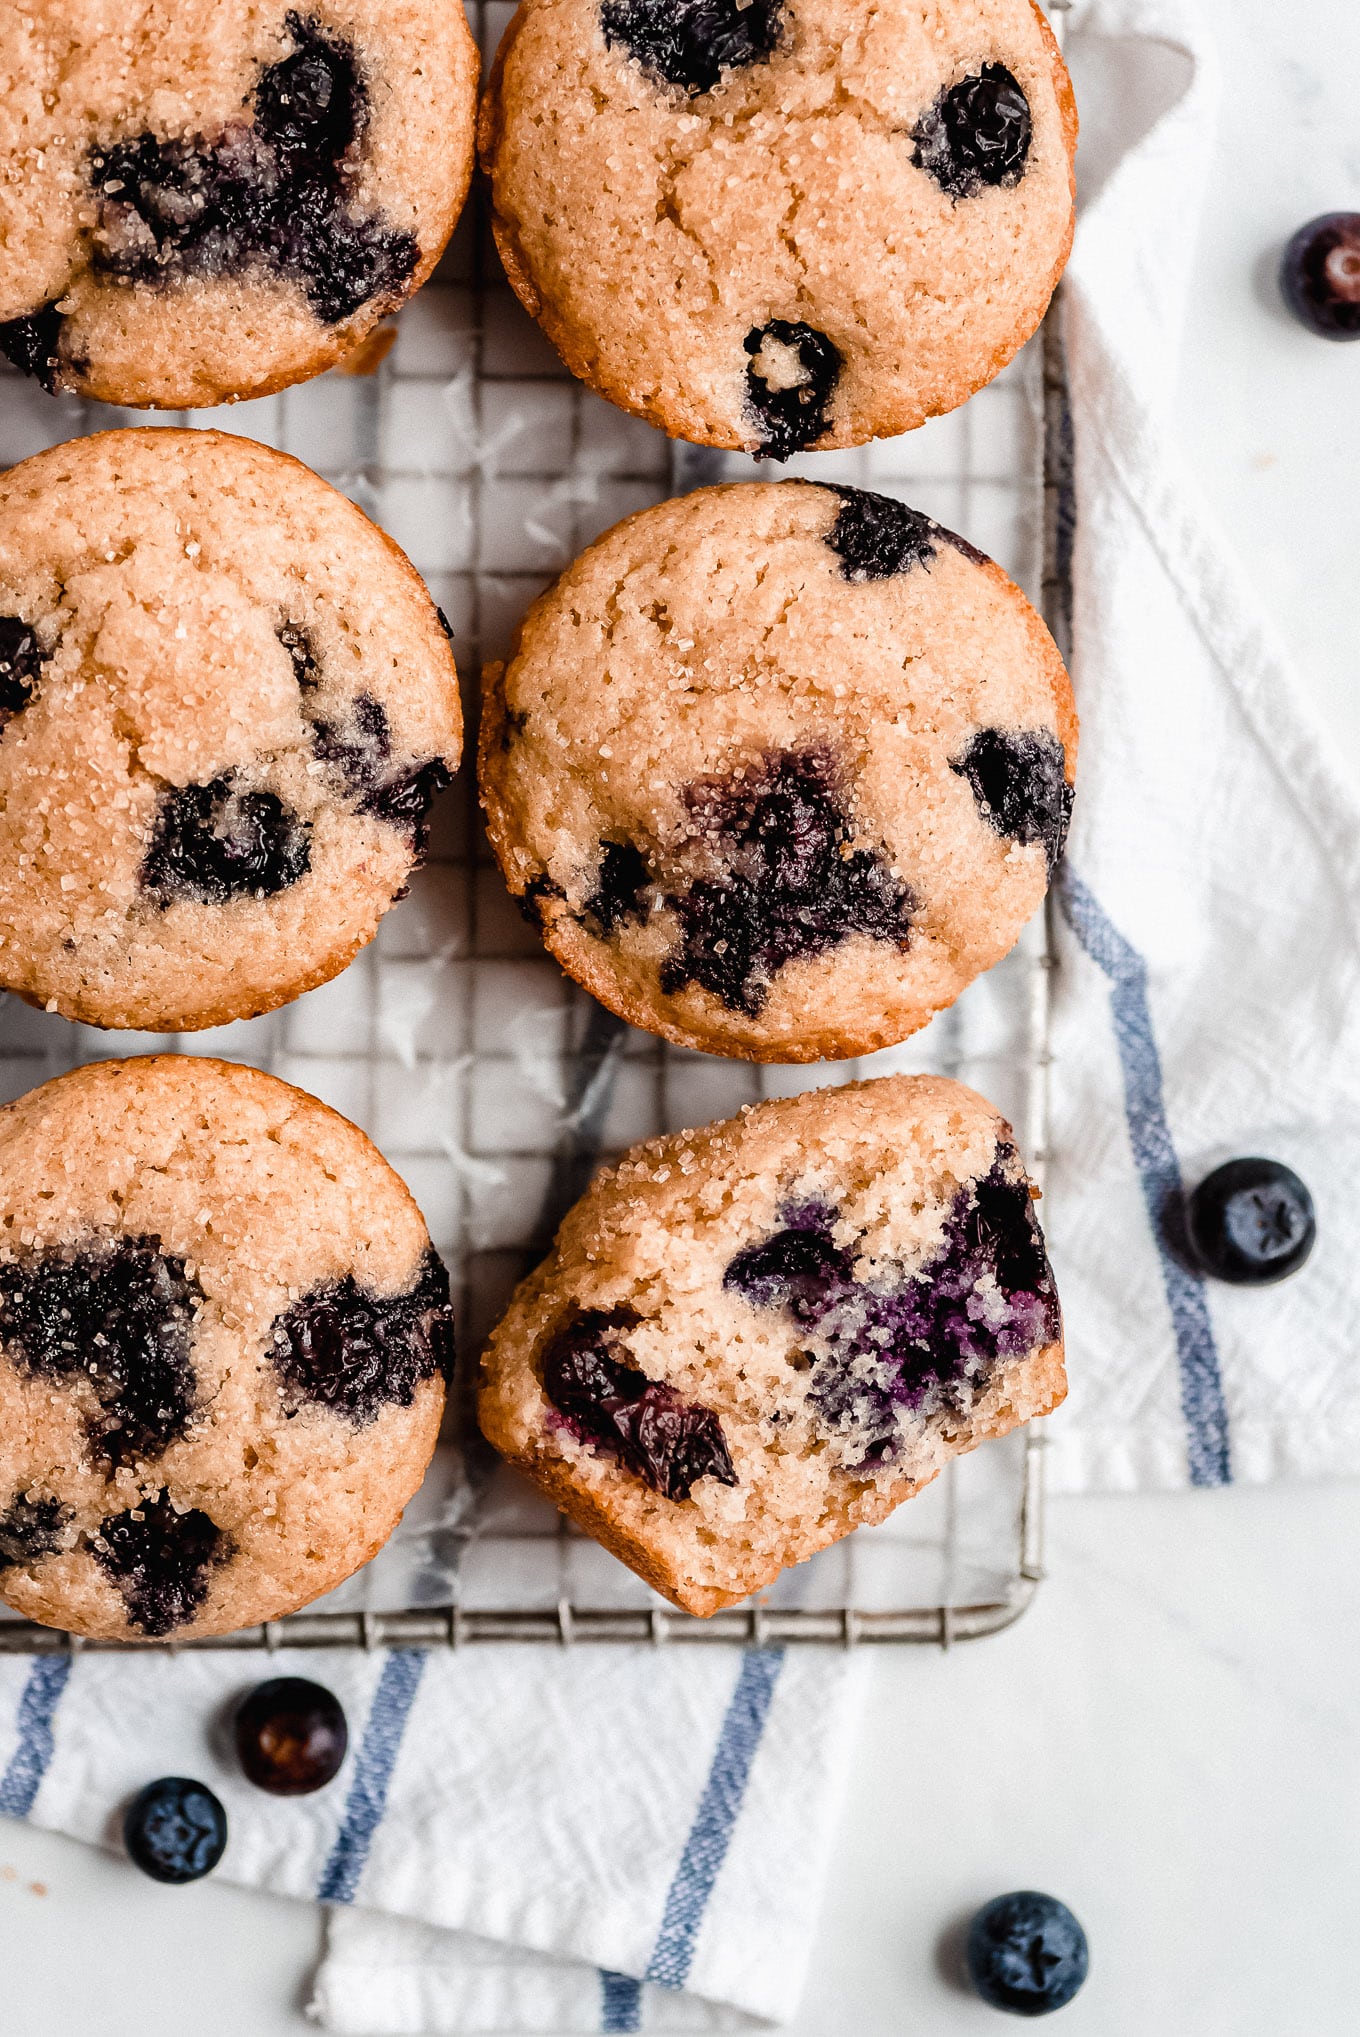 Six Greek Yogurt Muffins stuffed with blueberries and topped with turbinado sugar sitting on a cooling rack.